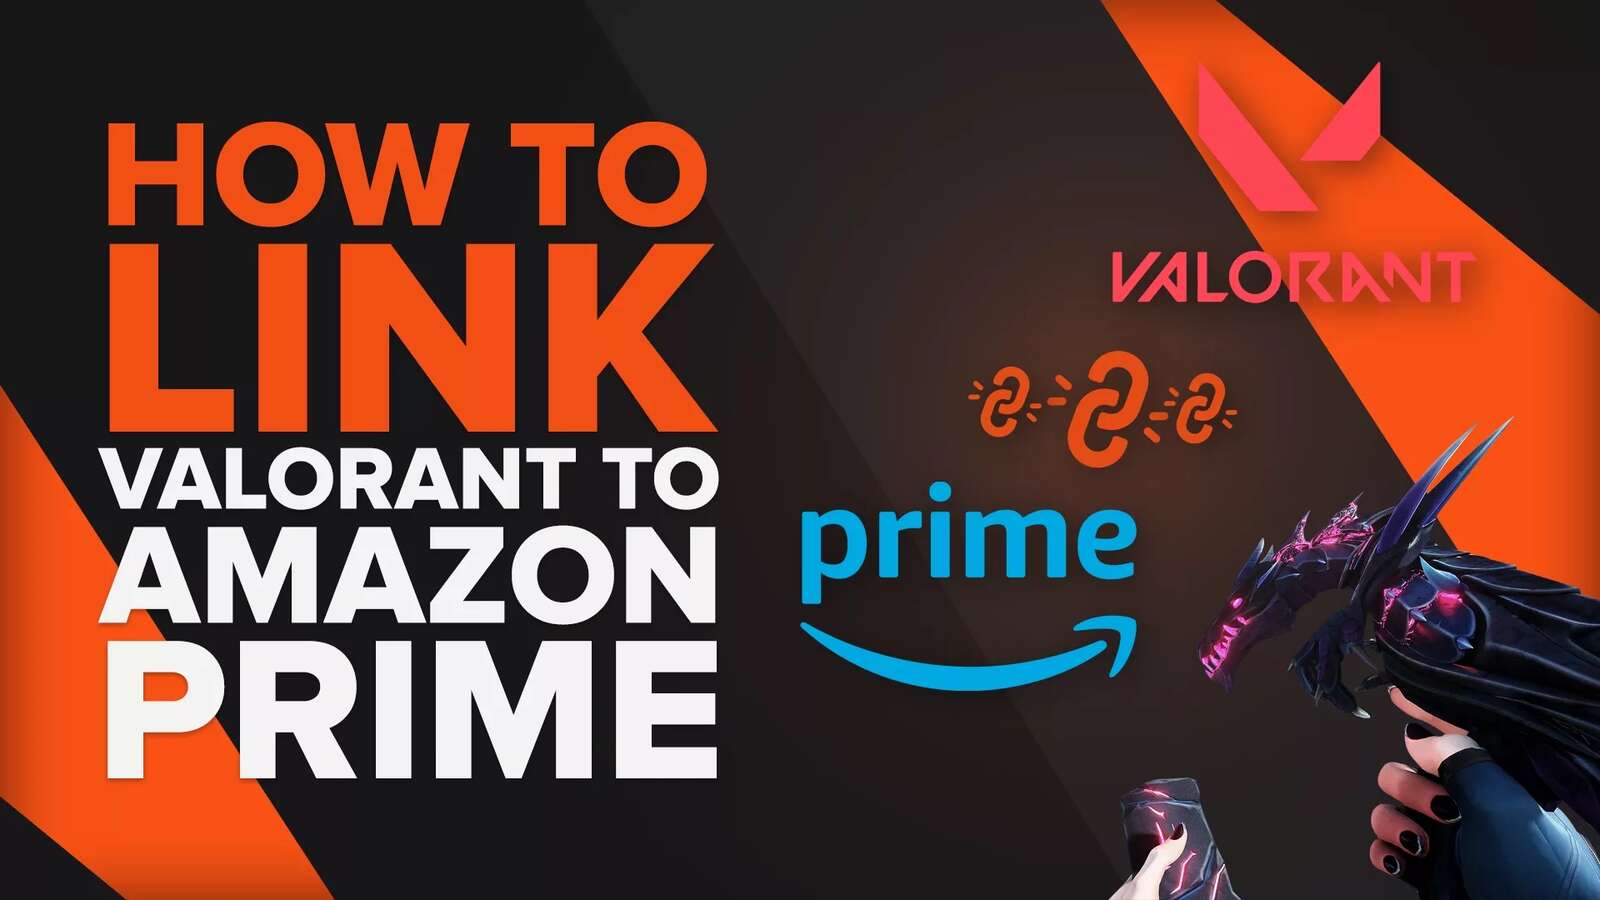 How To Link Valorant To Amazon Prime [Step-by-Step]